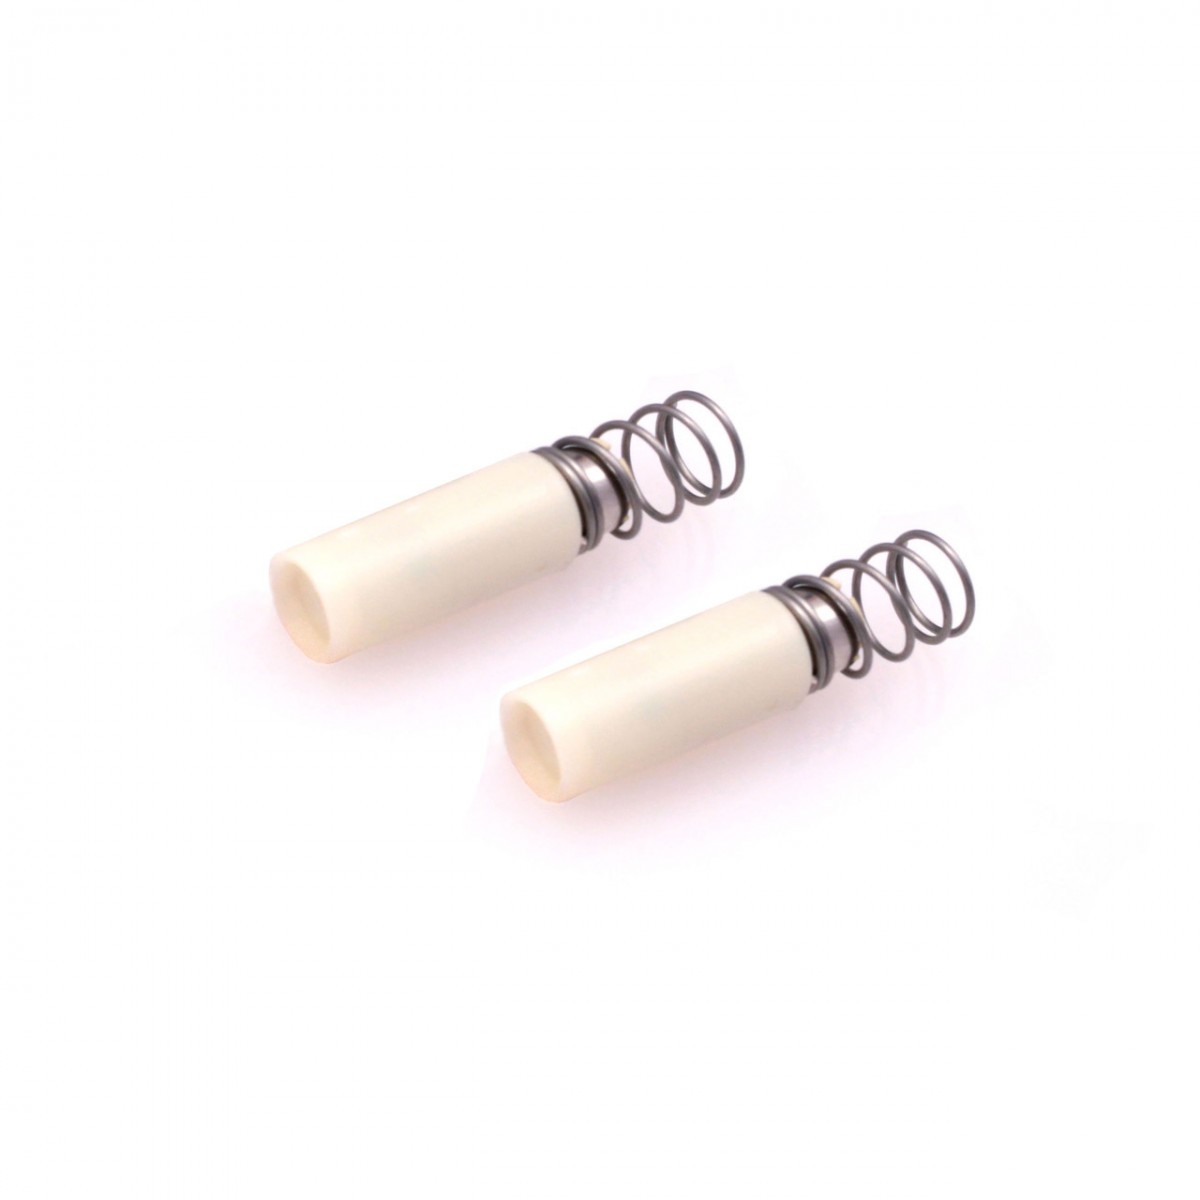 Replacement motors for the Z-Vibe and Z-Grabber vibration pen - pack of 2